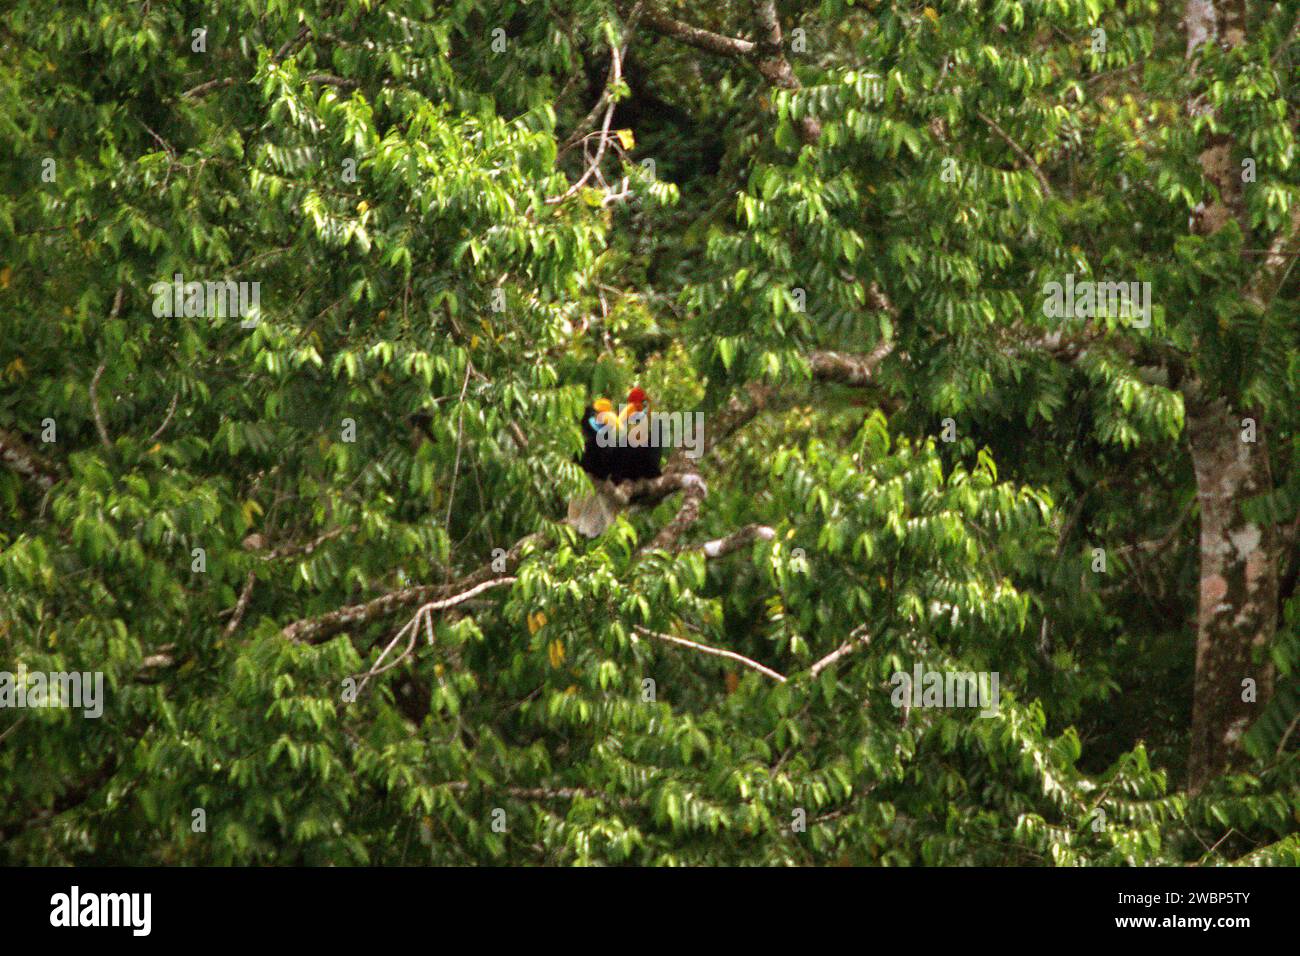 A pair of knobbed hornbill (Rhyticeros cassidix) is photographed as they are having an interaction while perching on a branch of a tree in a vegetated area at the foot of Mount Tangkoko and Duasudara (Dua Saudara) in Bitung, North Sulawesi, Indonesia. The International Union for Conservation of Nature (IUCN) concludes that rising temperatures have led to—among others—ecological, behavioral, and physiological changes in wildlife species and biodiversity. 'In addition to increased rates of disease and degraded habitats, climate change is also causing changes in species themselves, which ... Stock Photo